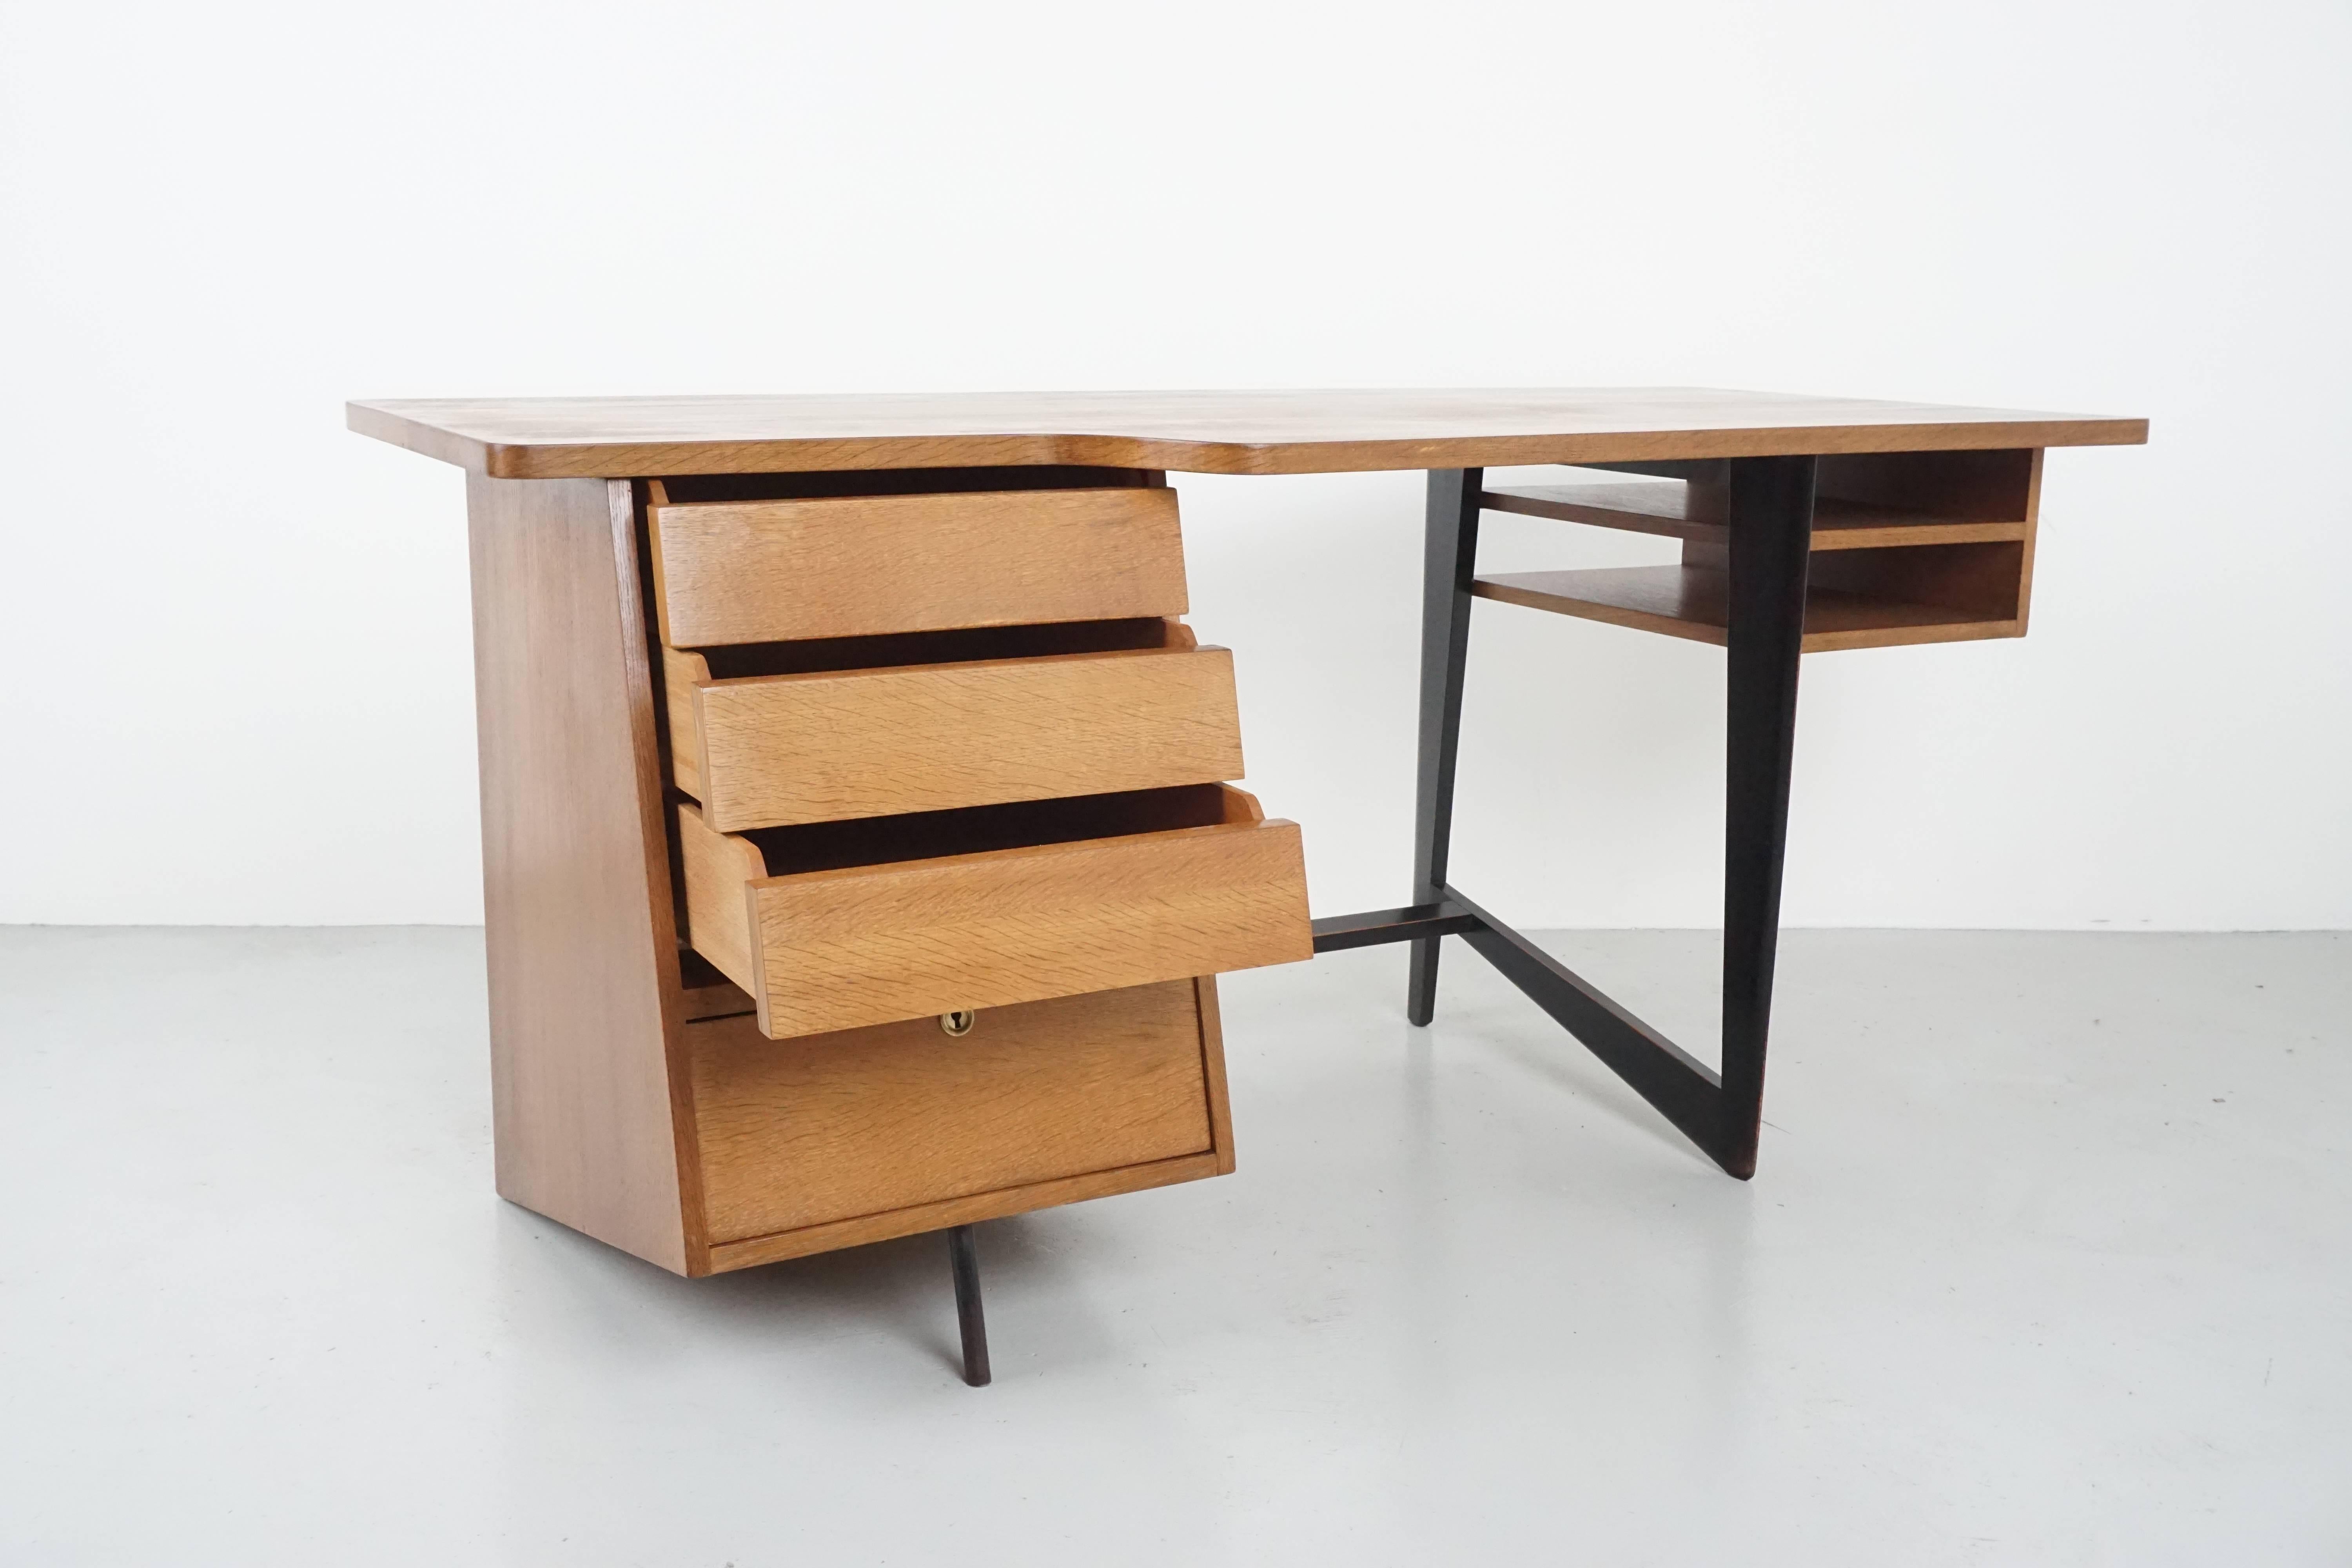 French oak desk by Claude Vassal "Magasin Pilote" edition, circa 1950. 
Fantastic original condition with great architectural design.
 